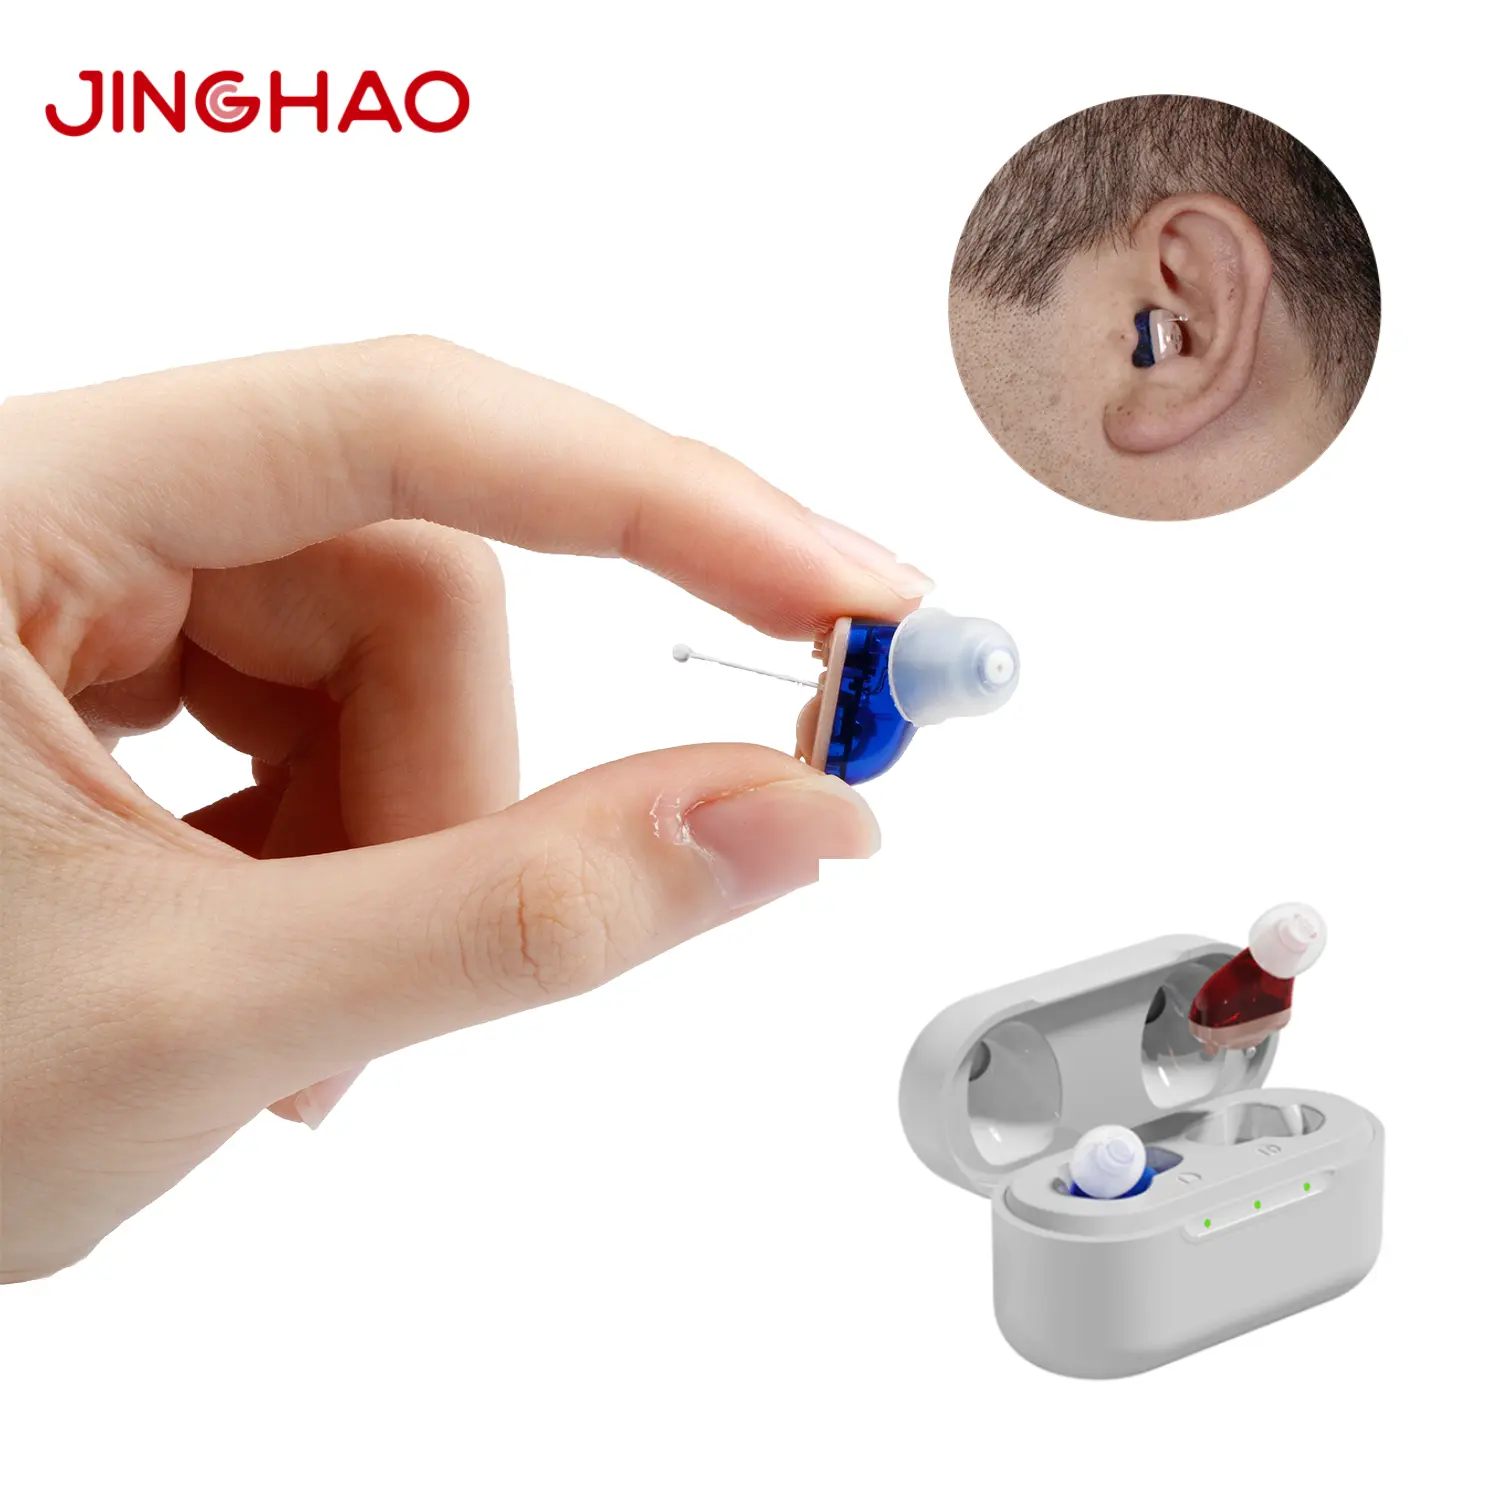 JINGHAO A17 Medical Mini CIC Popular OTC Digital Hearing Aids Rechargeable For Seniors and Deafness